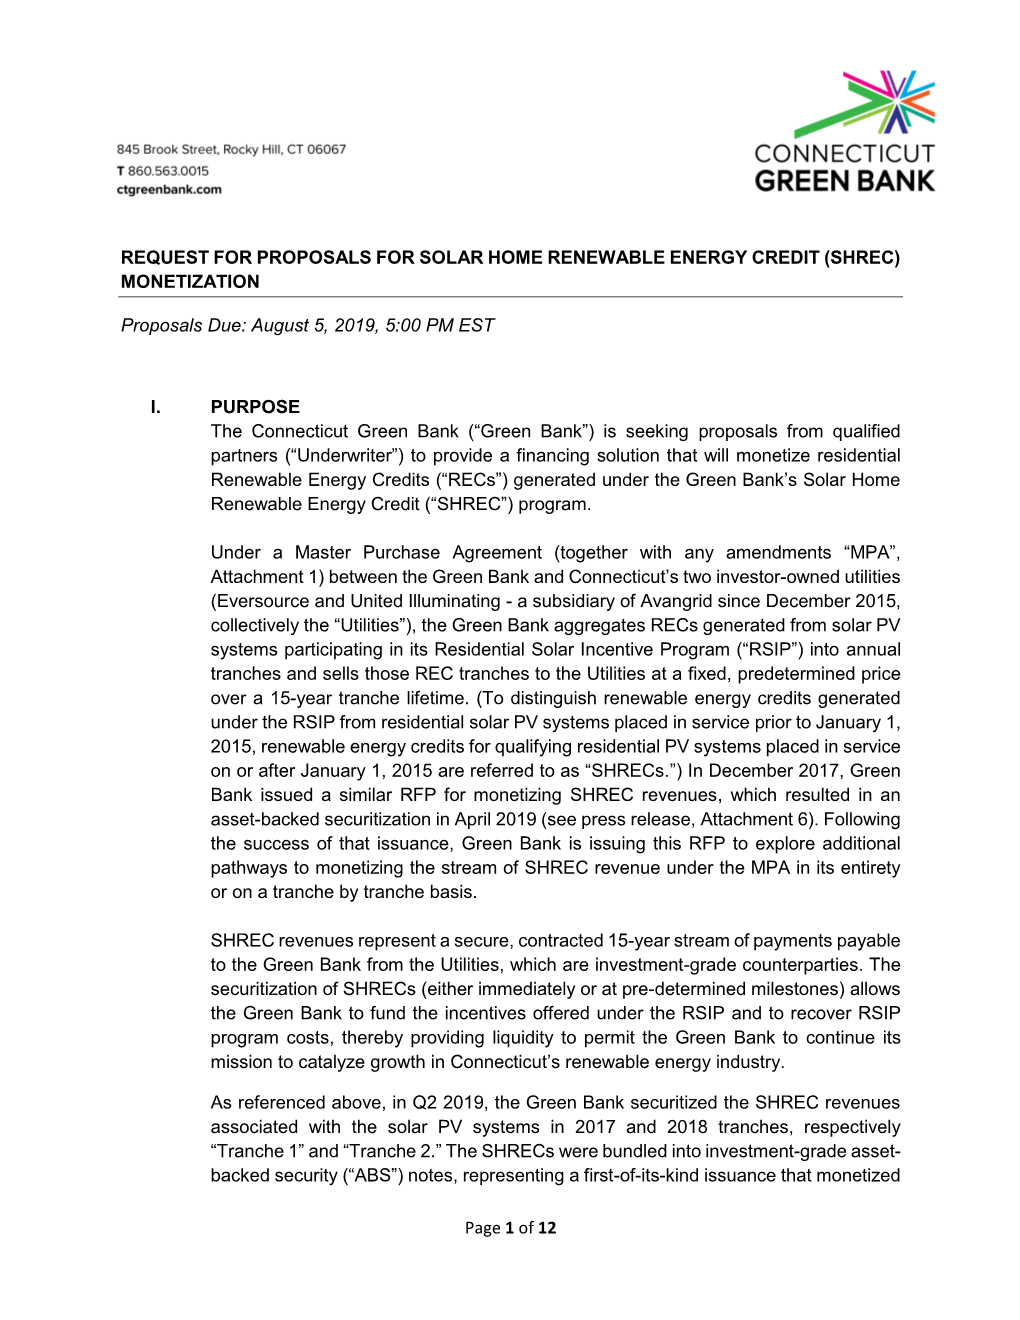 Page 1 of 12 REQUEST for PROPOSALS for SOLAR HOME RENEWABLE ENERGY CREDIT (SHREC) MONETIZATION Proposals Due: August 5, 2019, 5